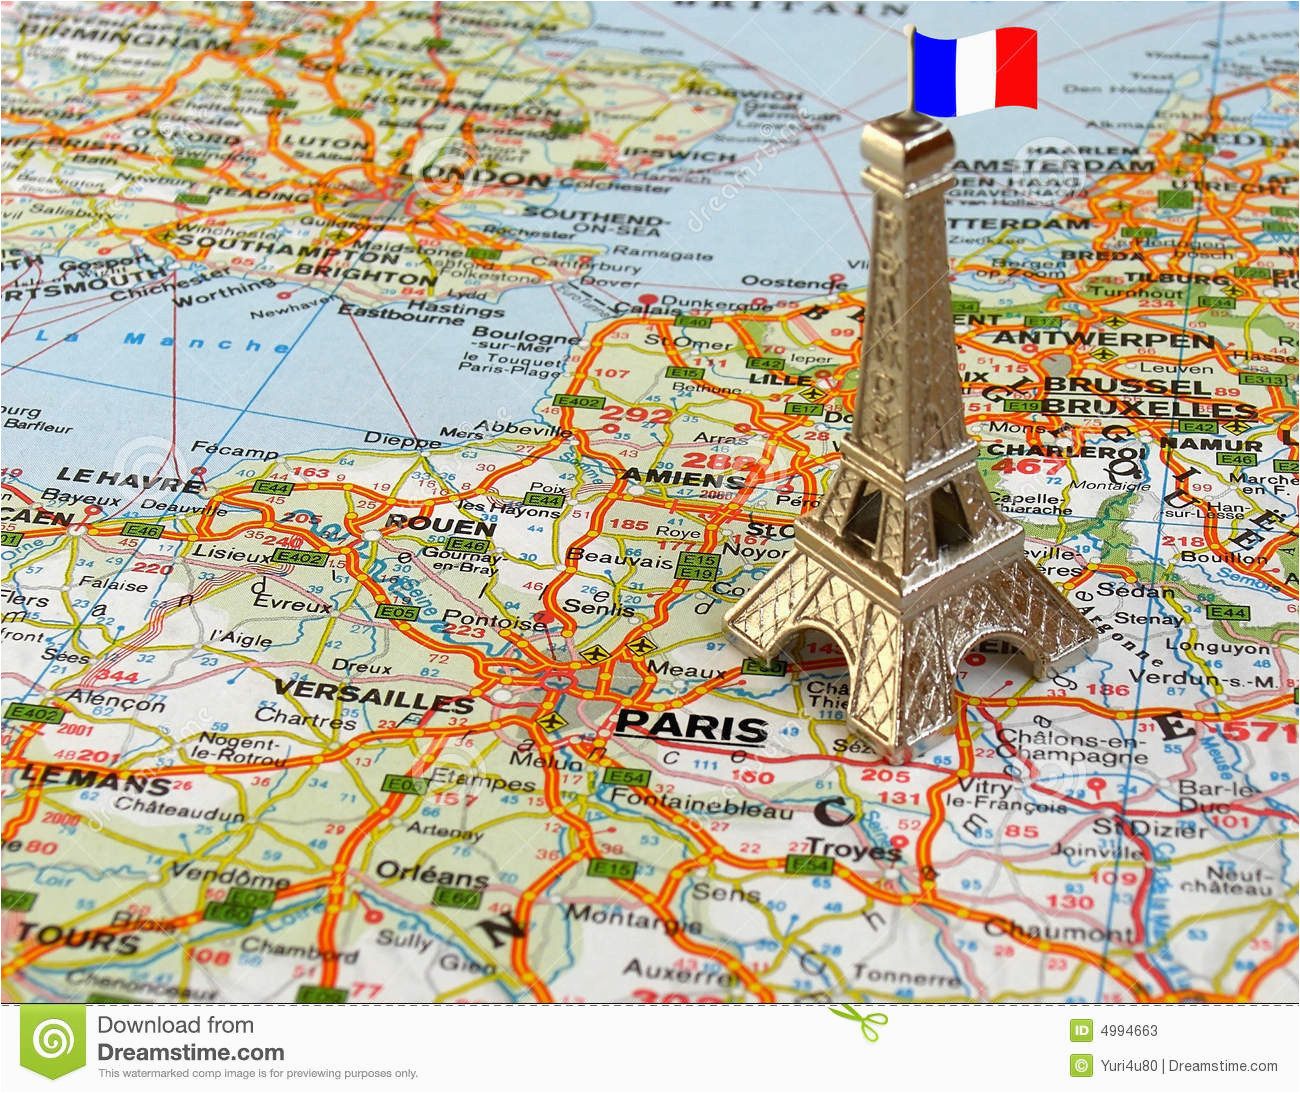 Map Of Eiffel Tower Paris France Eiffel Tower On Map Stock Image Image Of Monument Attraction 4994663 Of Map Of Eiffel Tower Paris France 